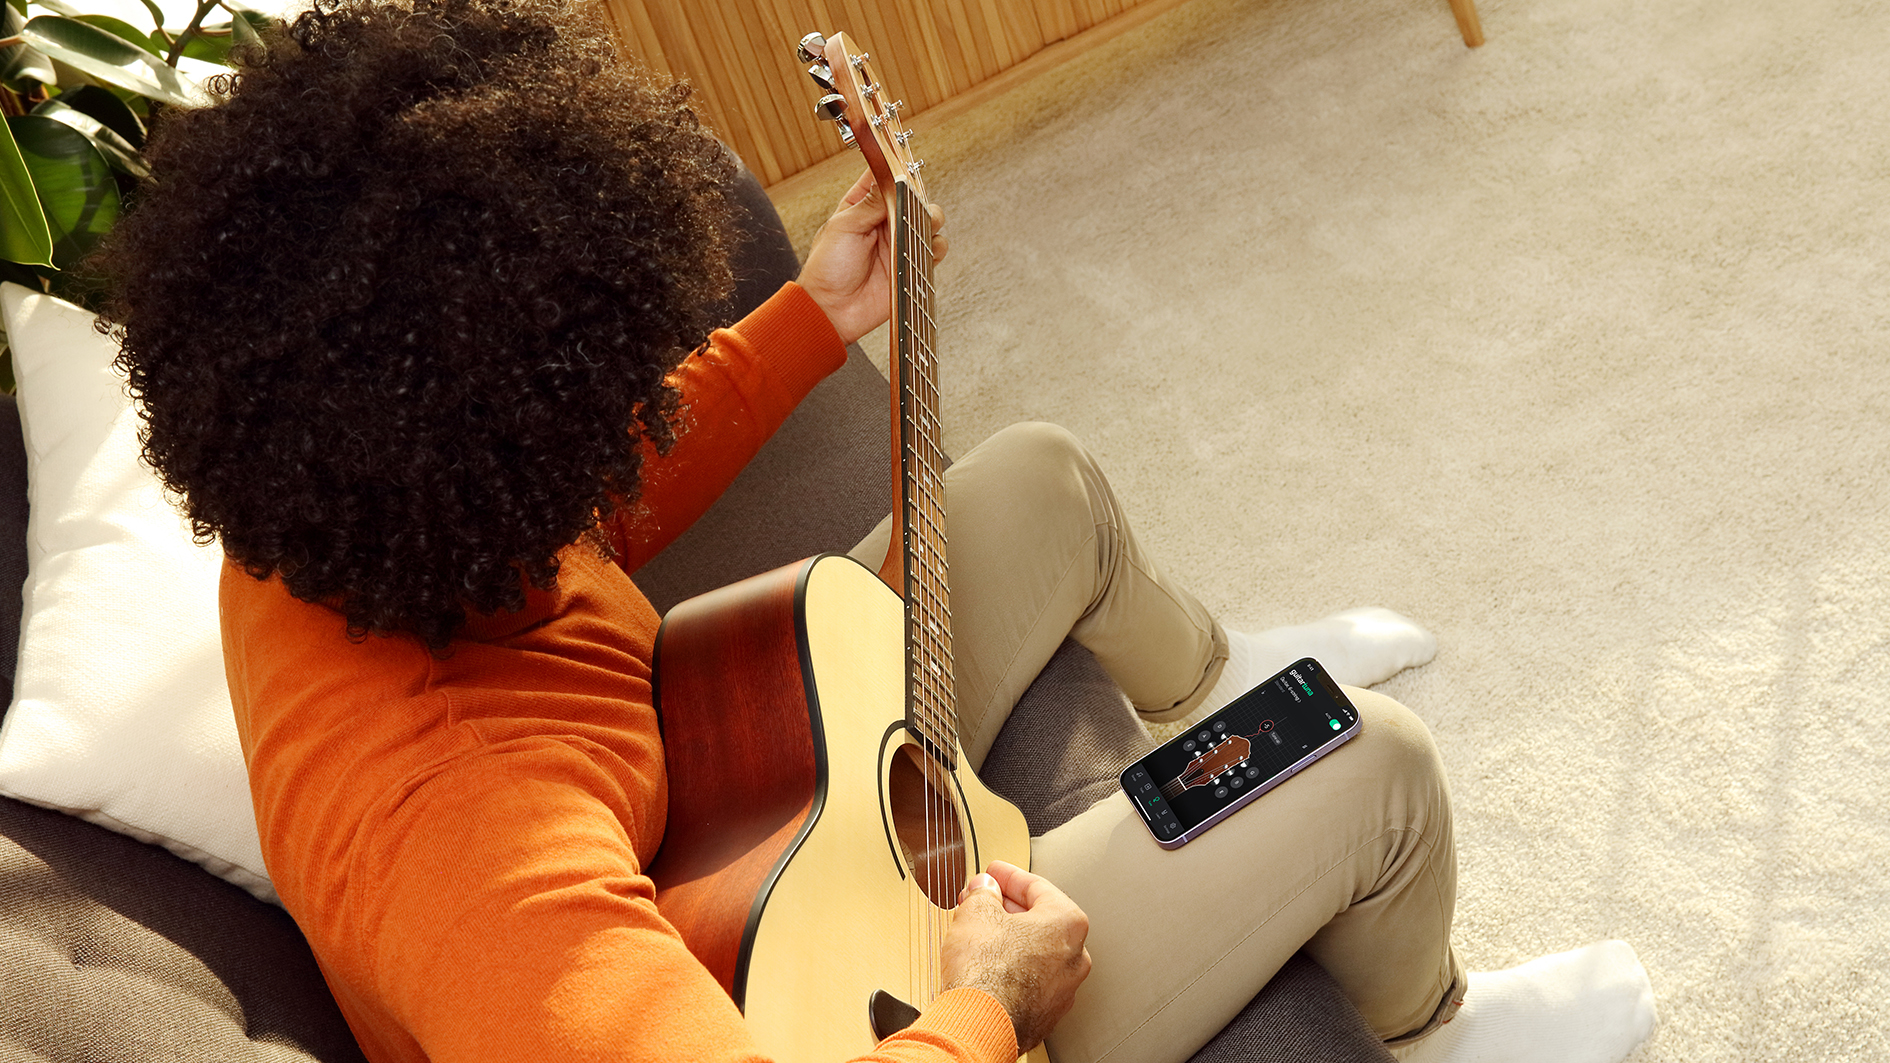 Yousician: Learn Guitar & Bass - Apps on Google Play